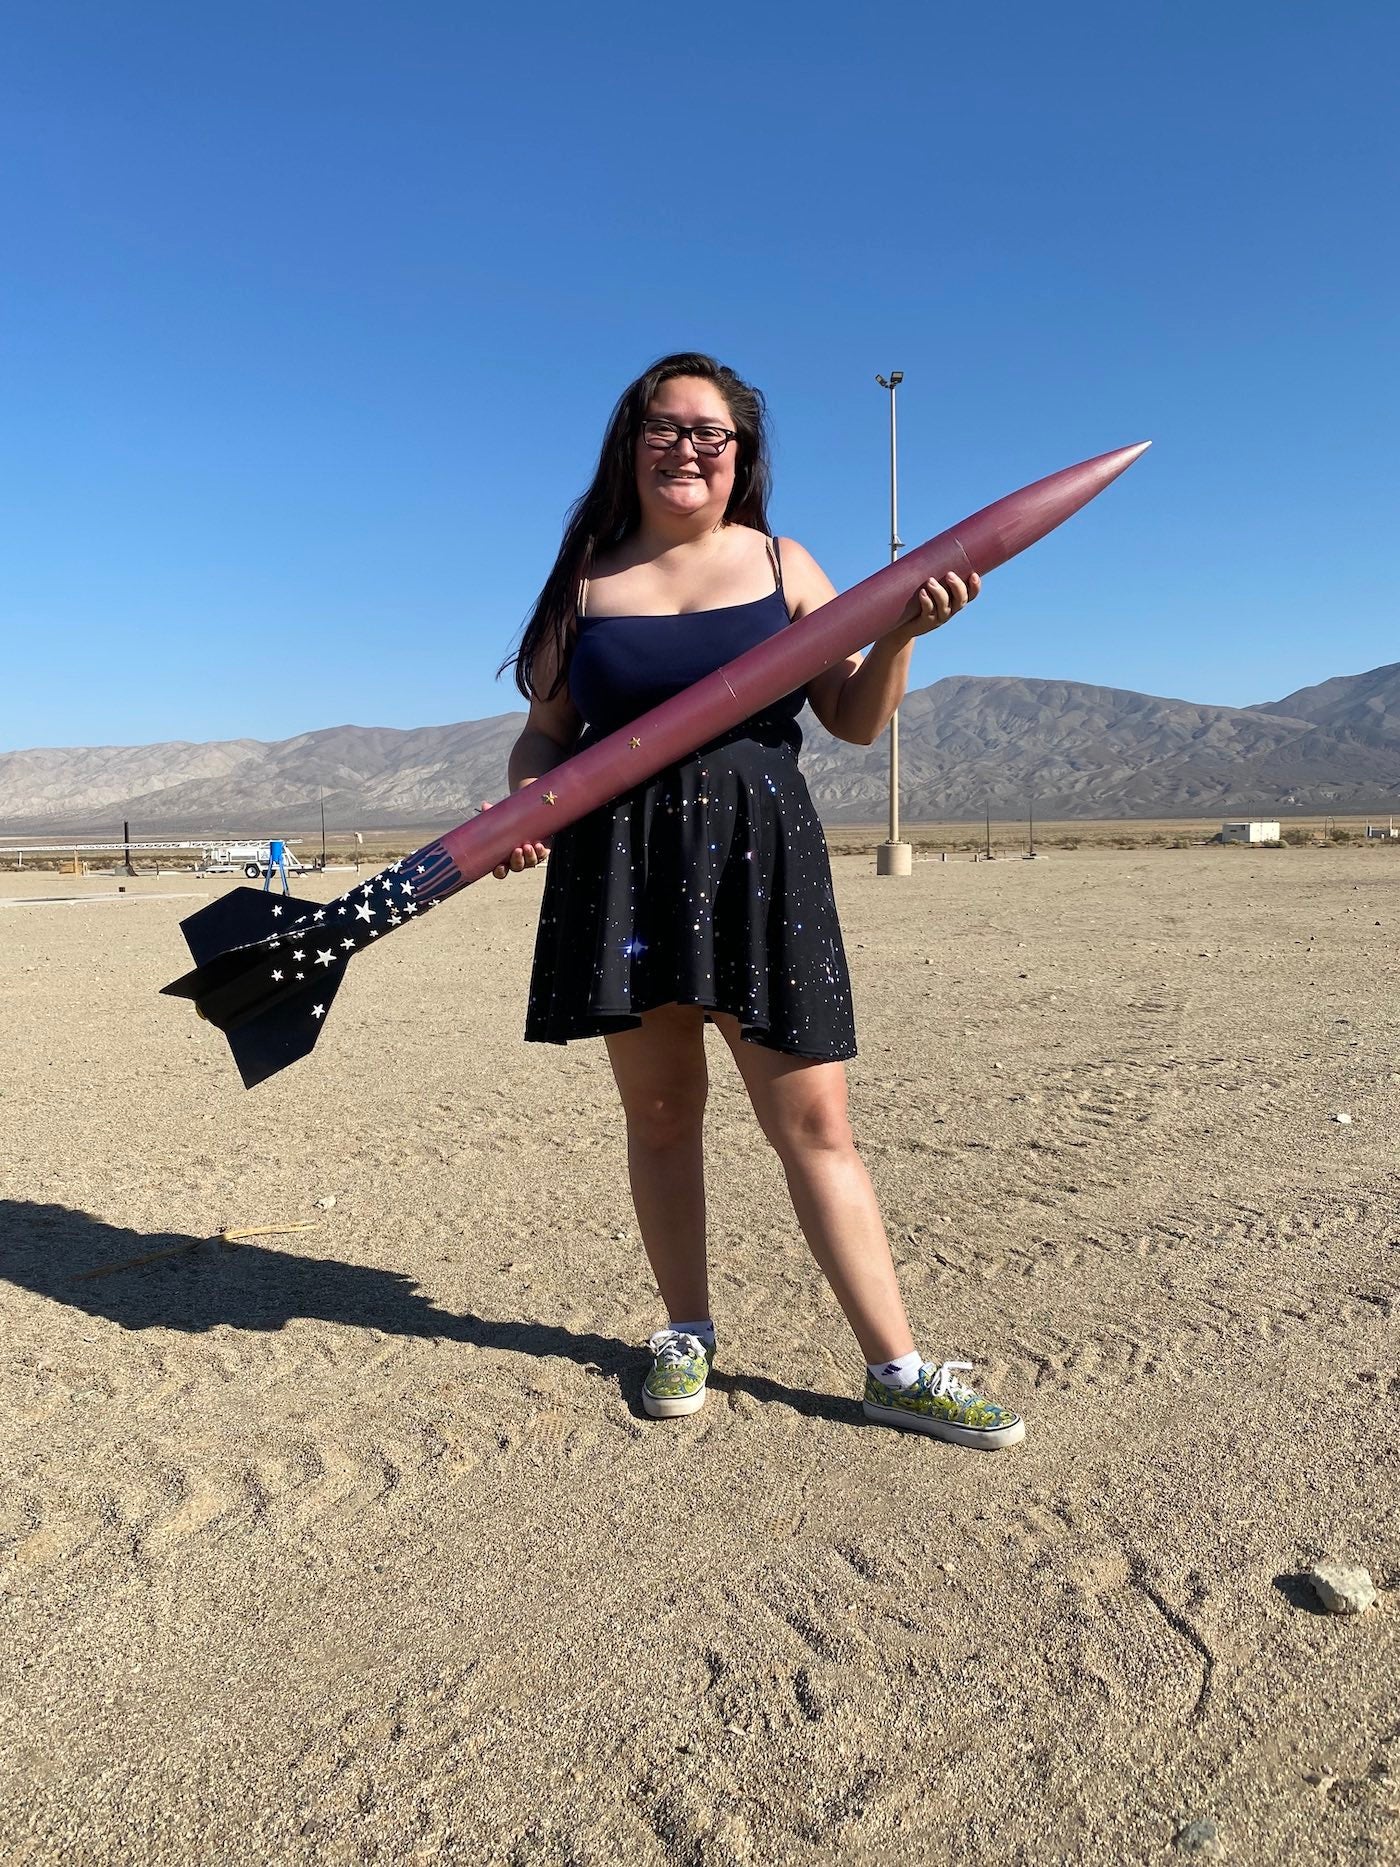 Caeley Looney loves all things robotics and space